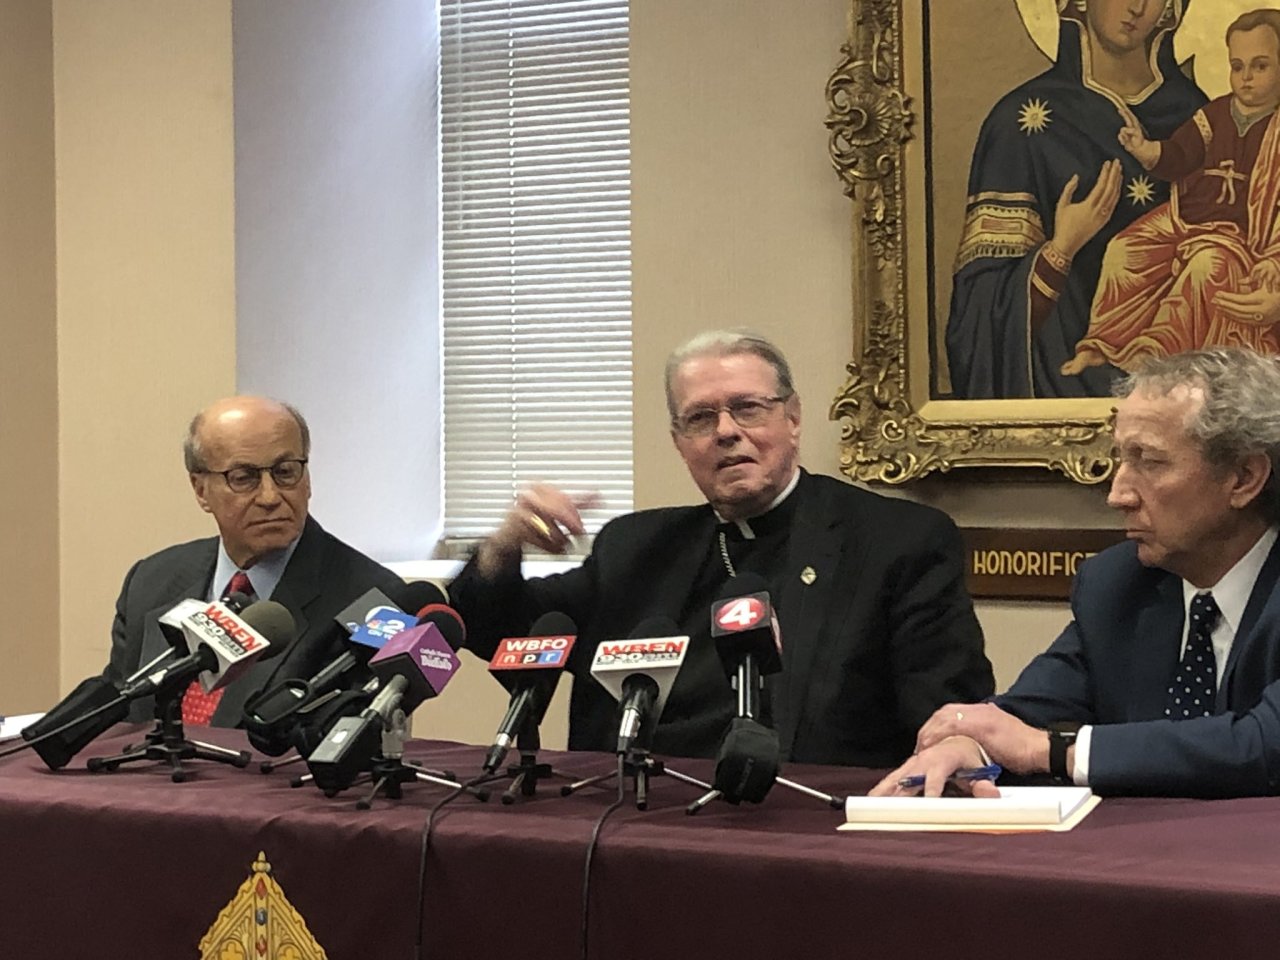 Catholic Archdiocese of Buffalo Files Bankruptcy to AVOID OR DELAY PAYING SEX ABUSE VICTIMS